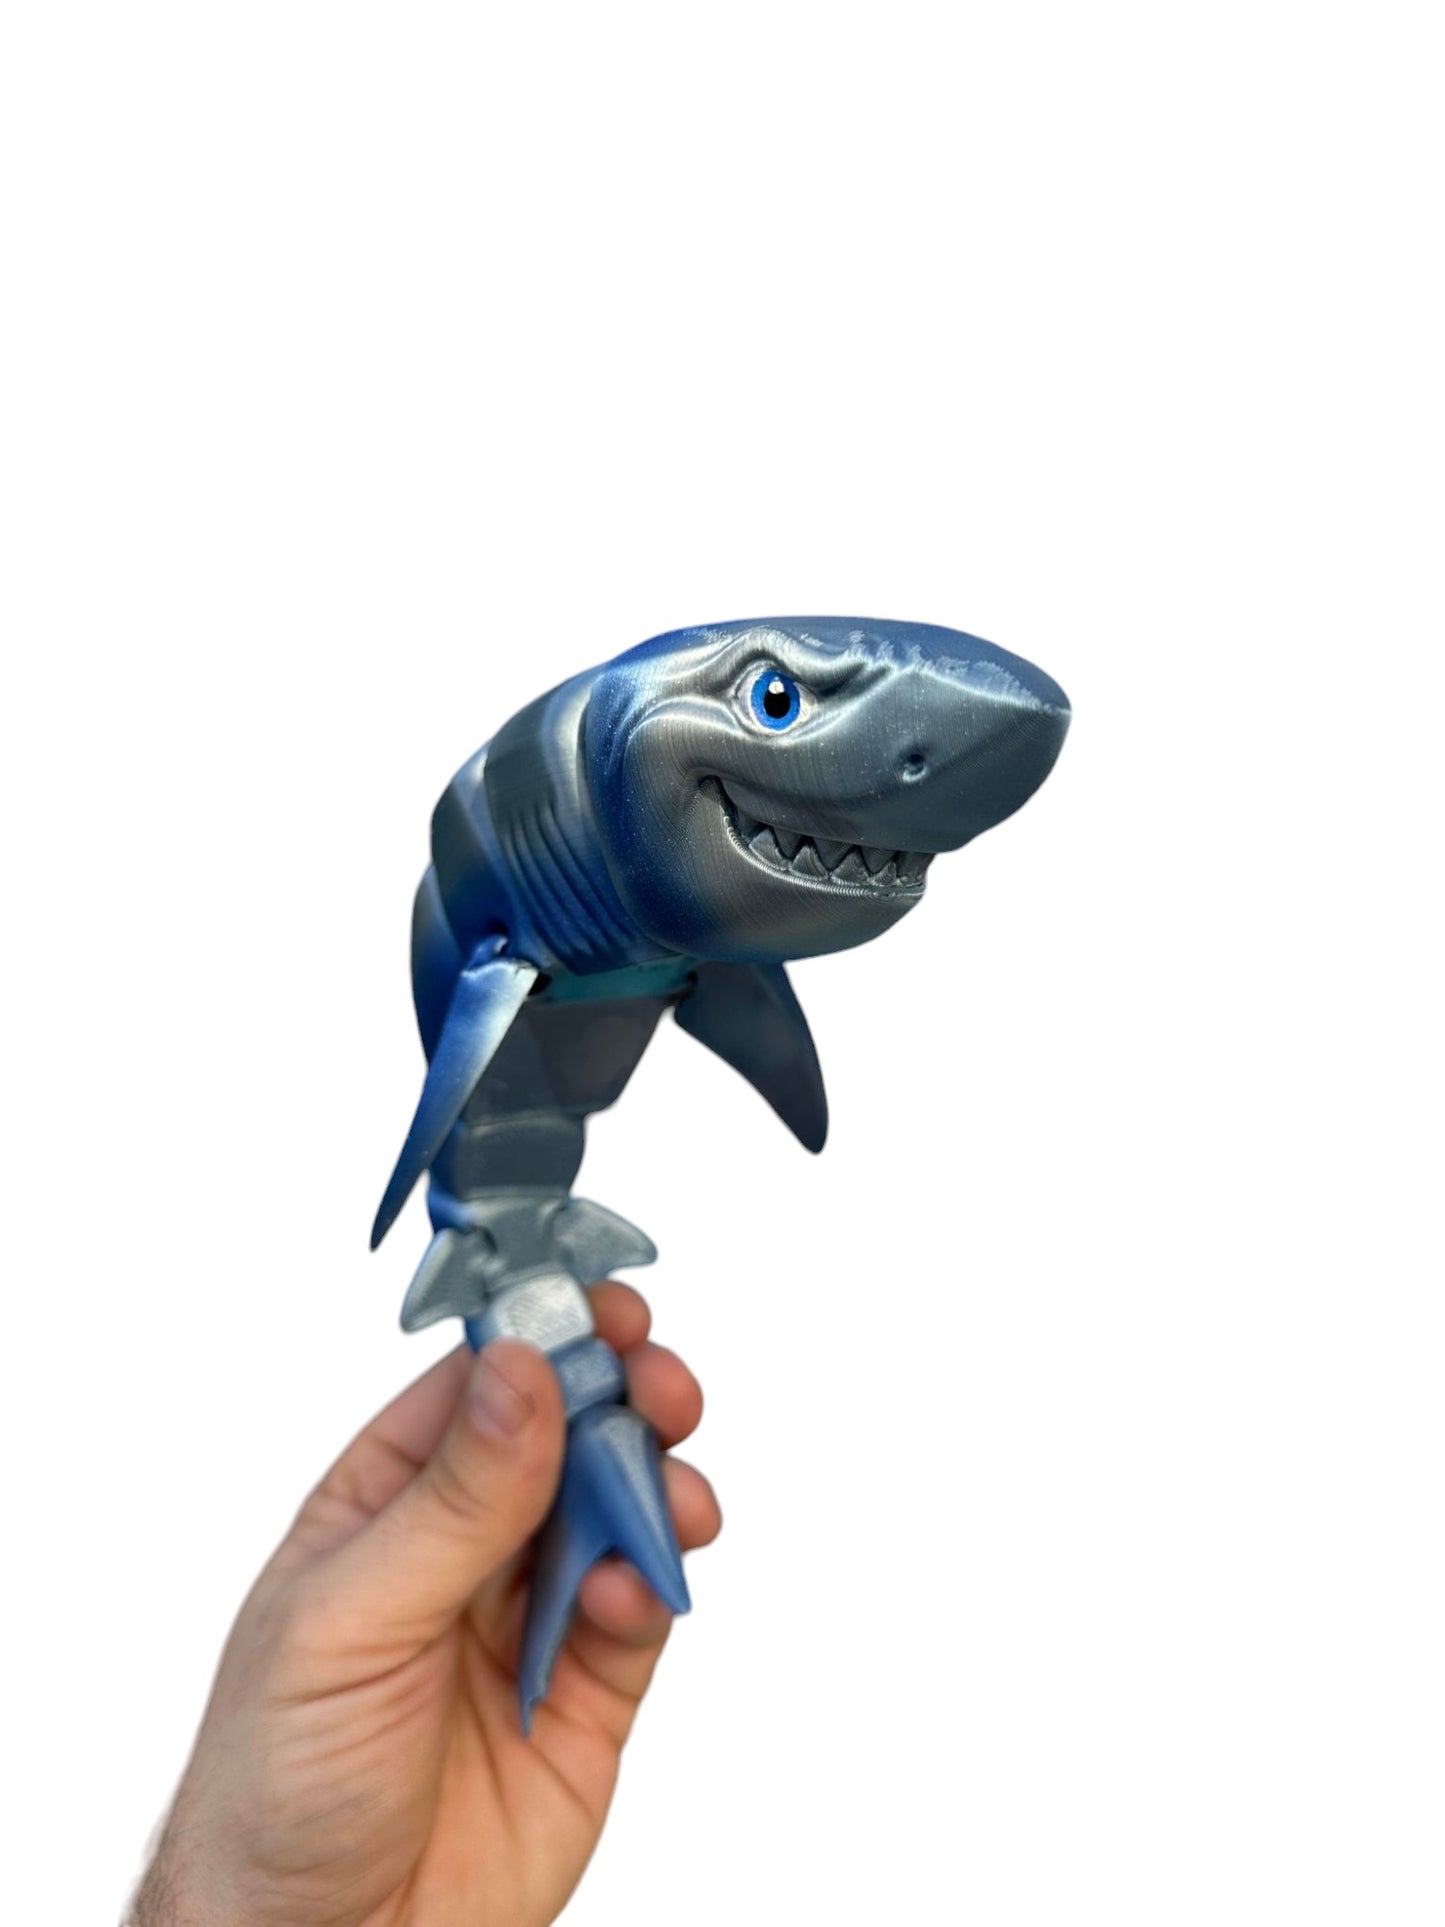 3D Printed Great White Shark